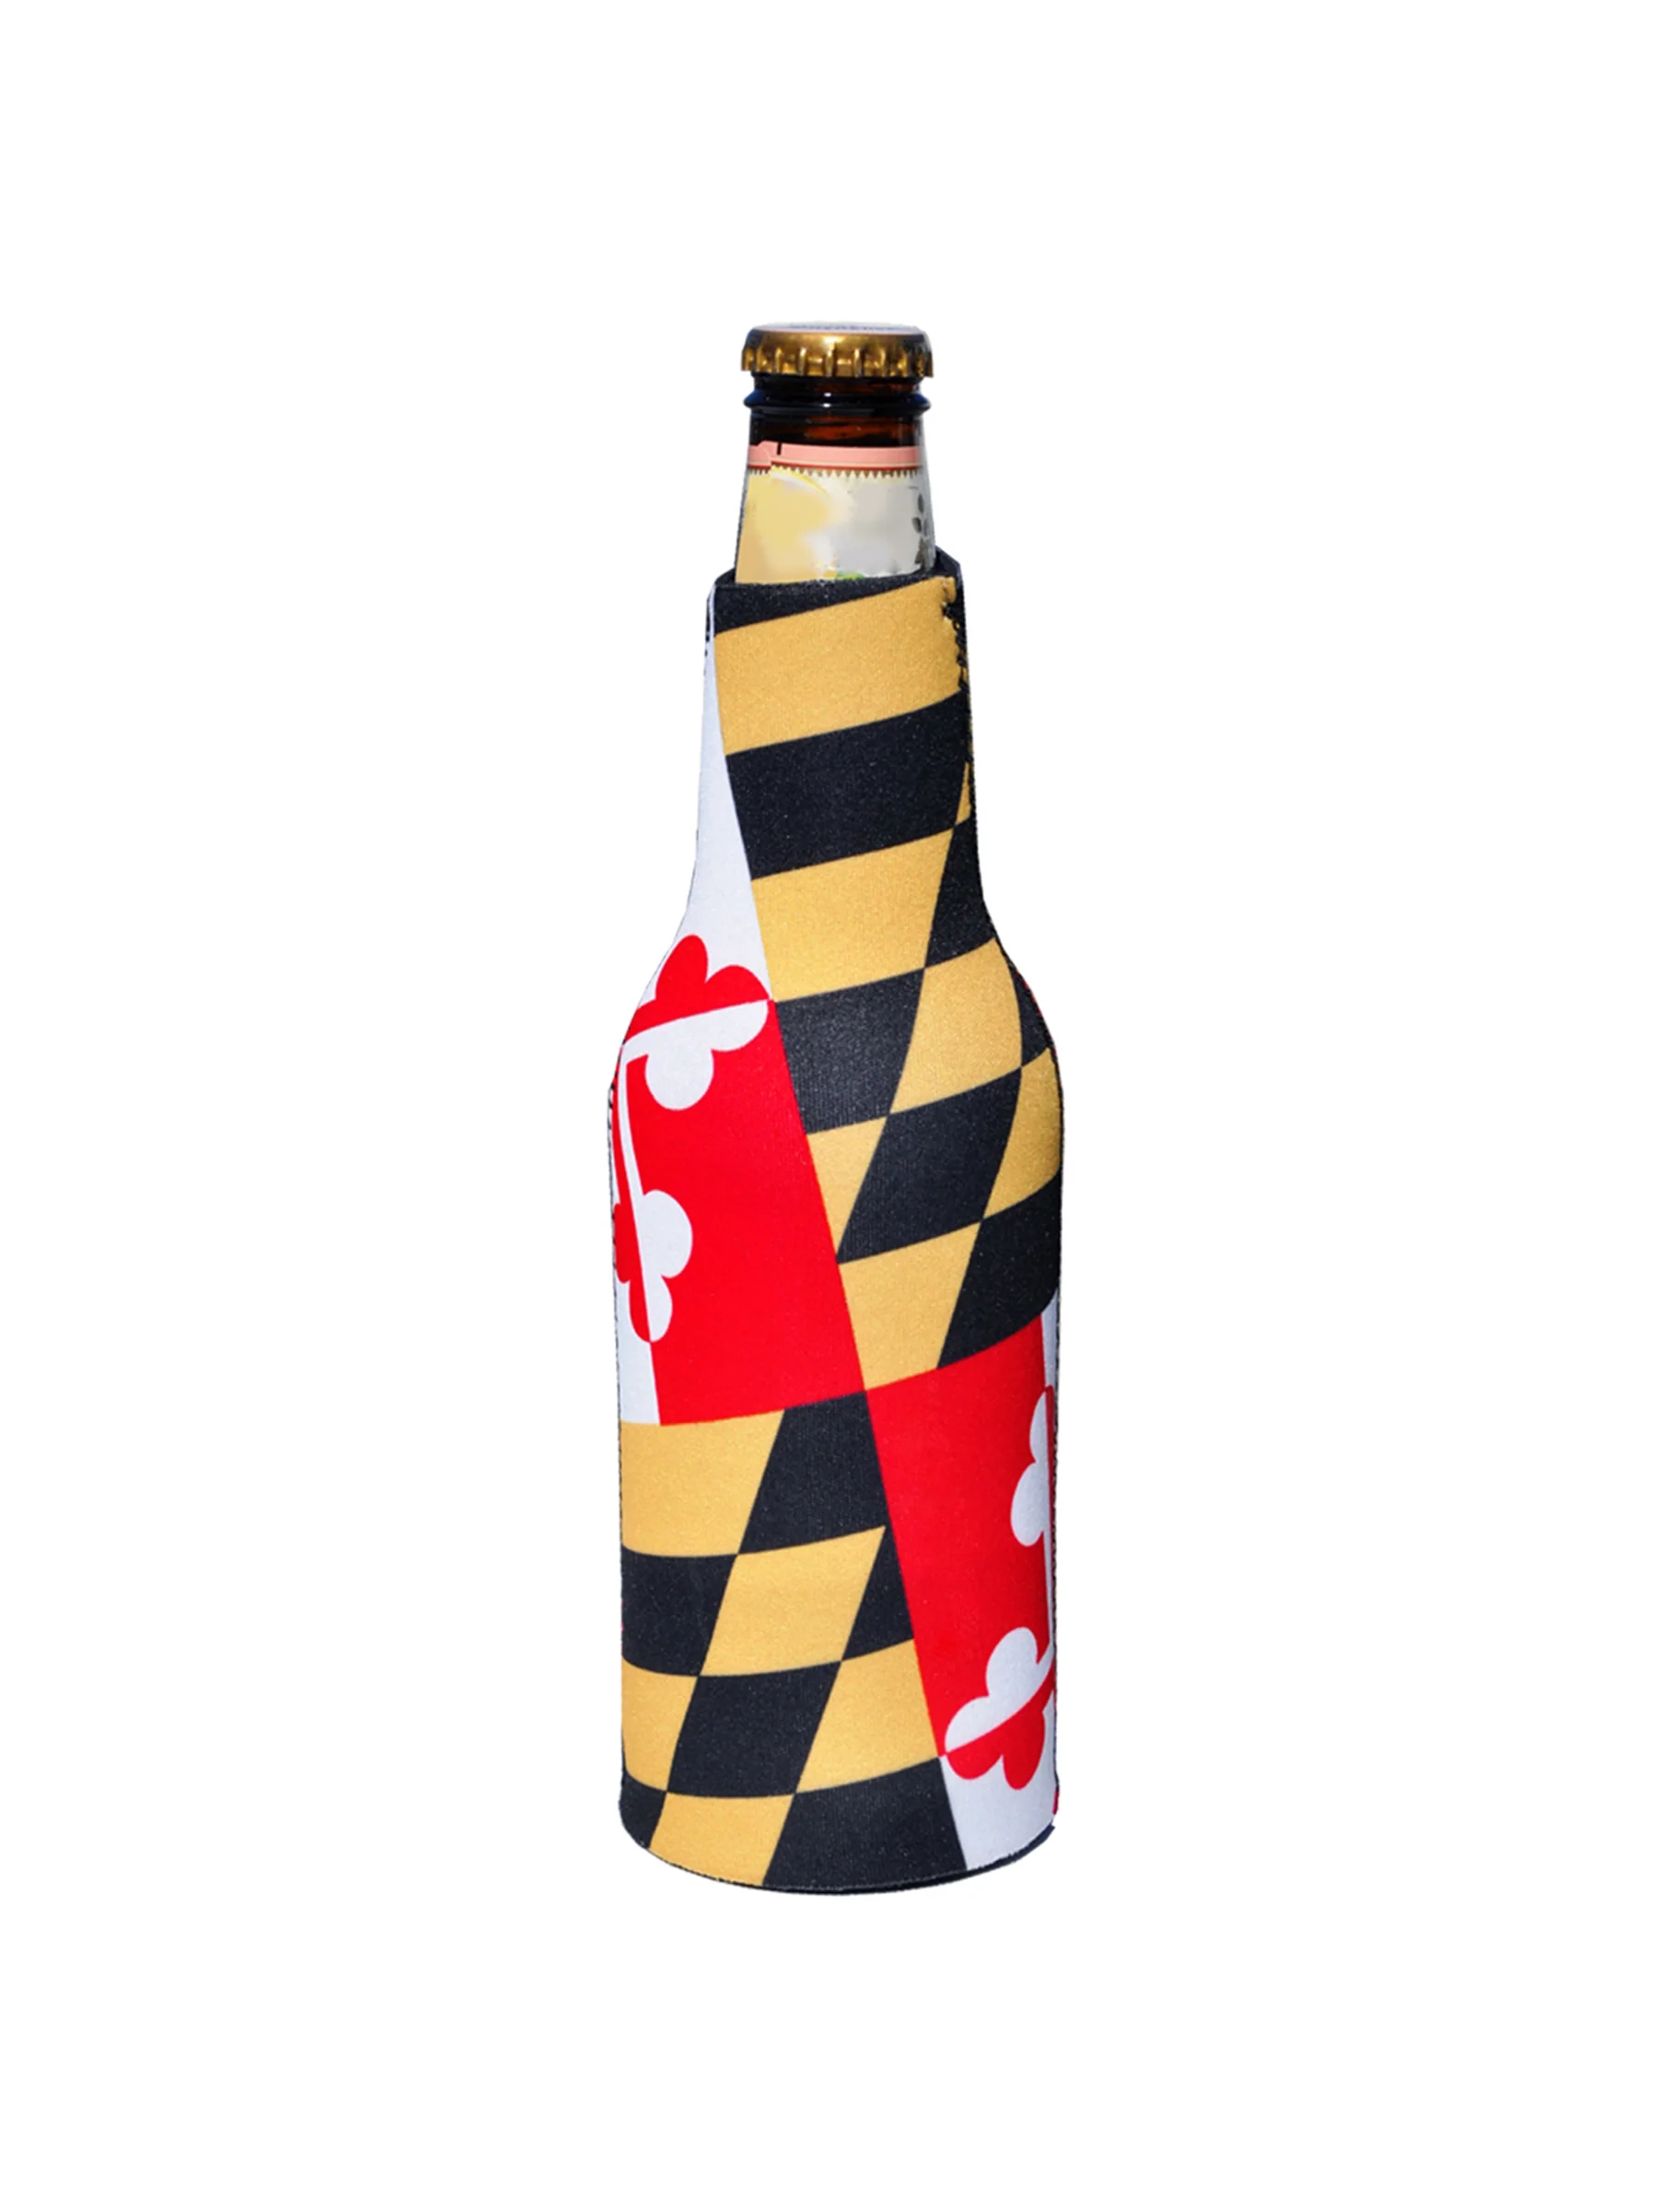 maryland-flag-bottle-suit-with-zipper